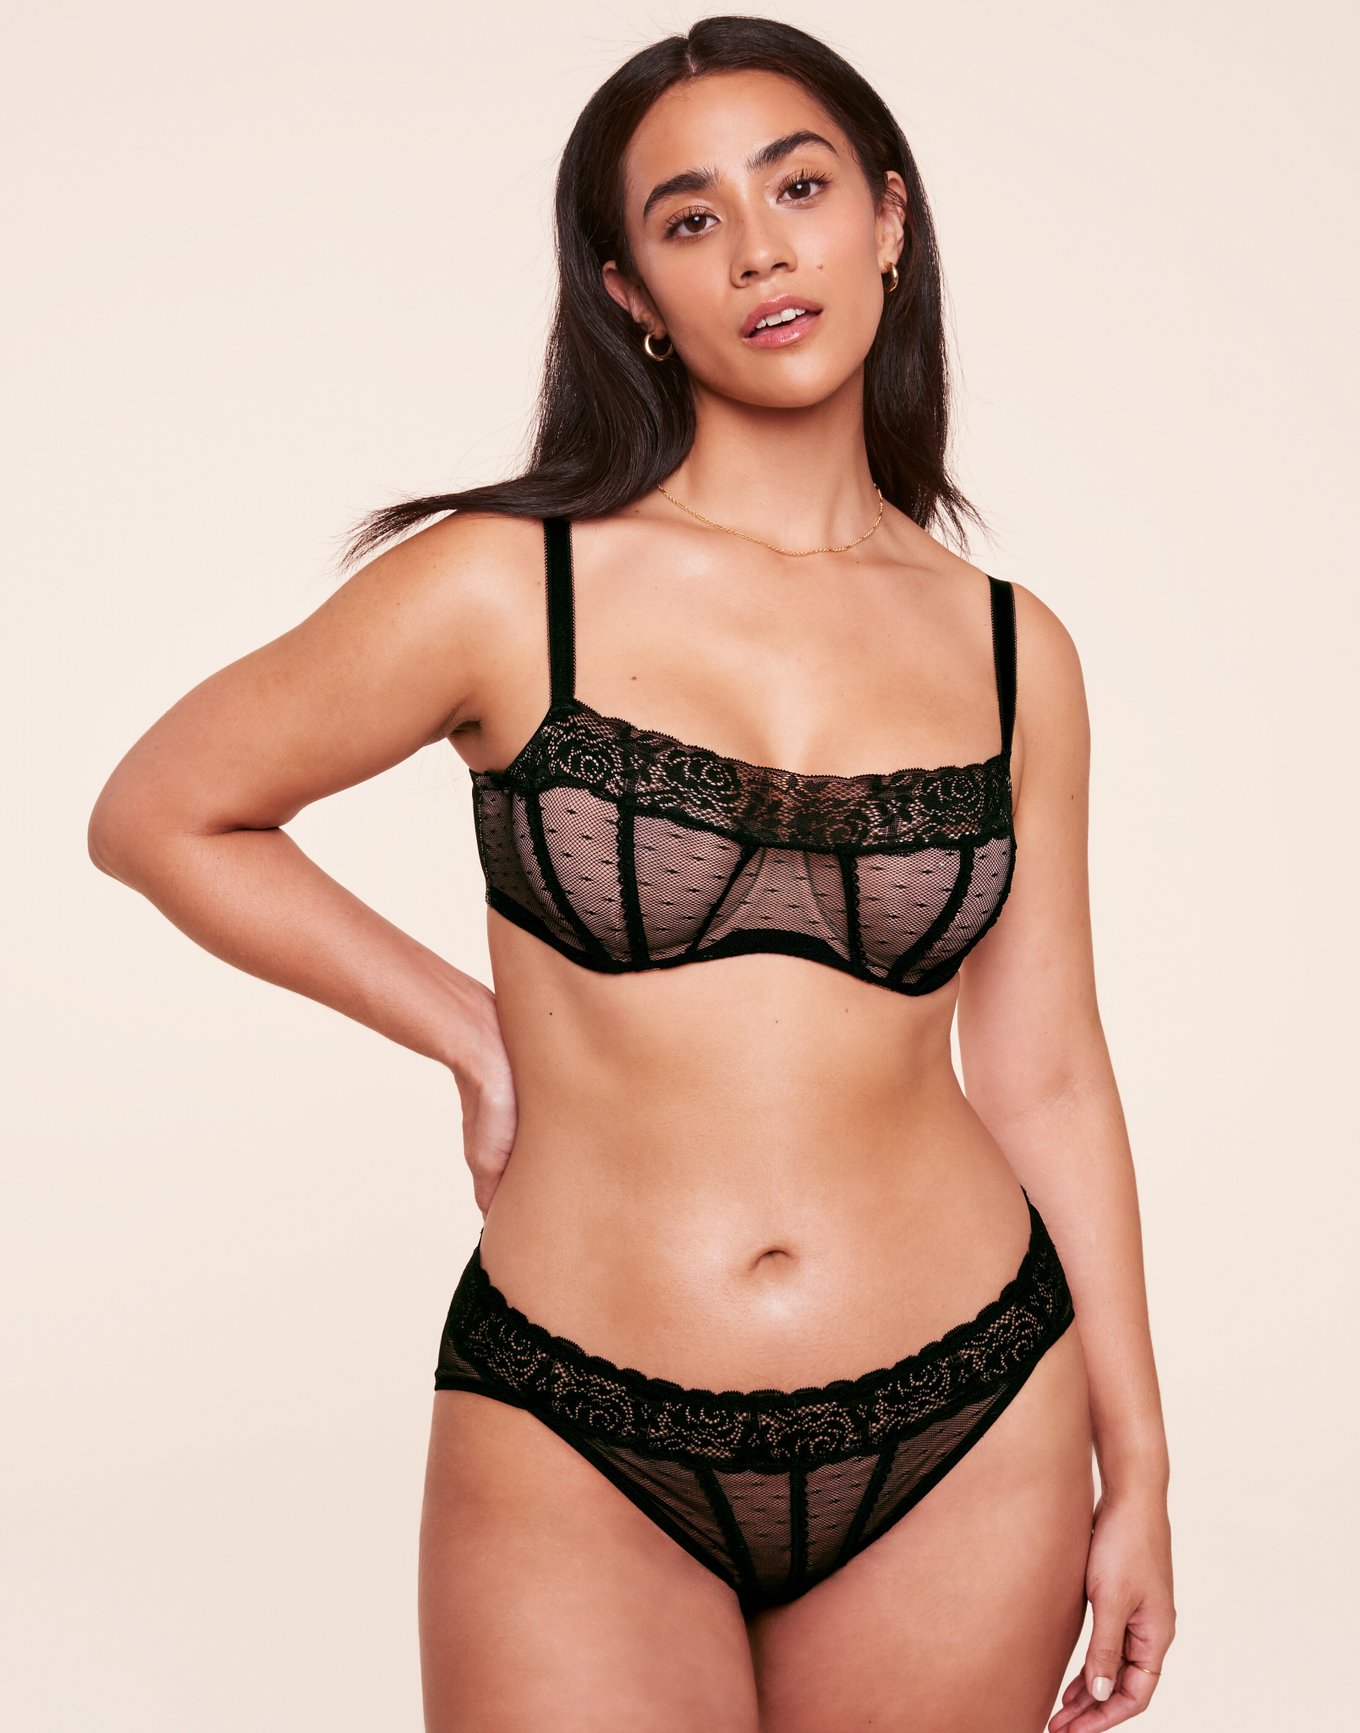 Kelly cupless bra and high waist lace knicker in black